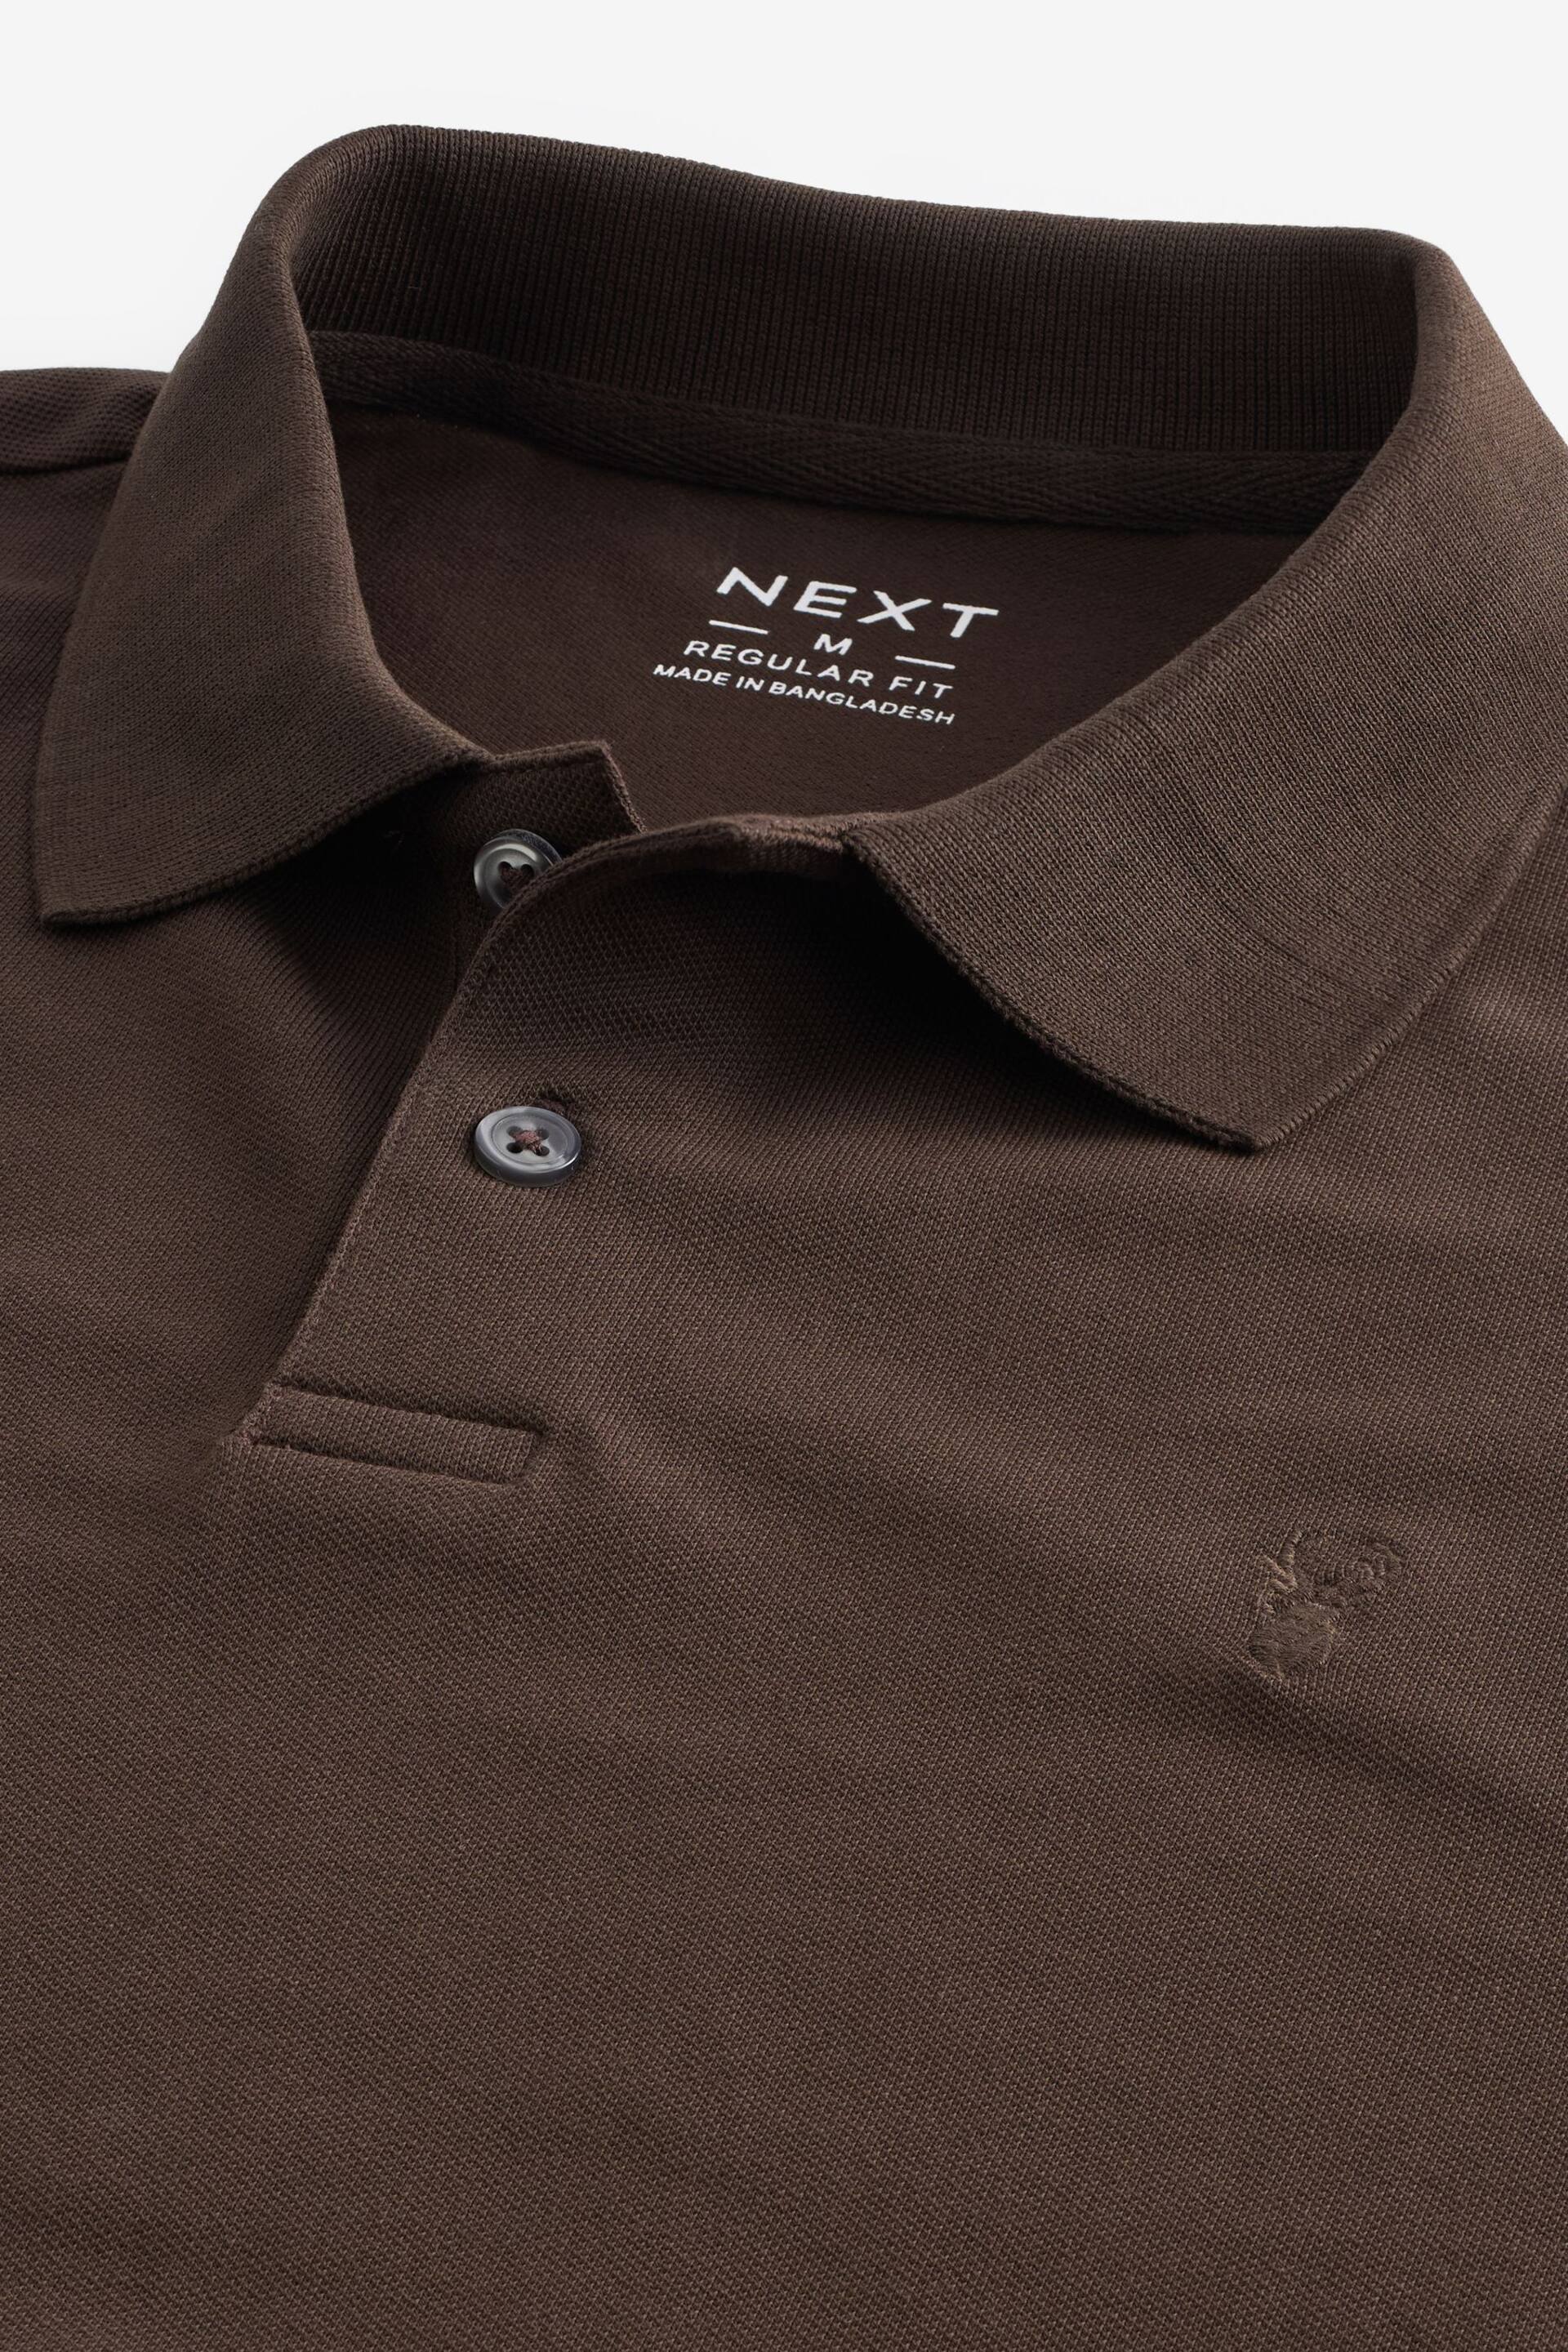 Brown Chocolate Regular Fit Short Sleeve Pique Polo Shirt - Image 7 of 8